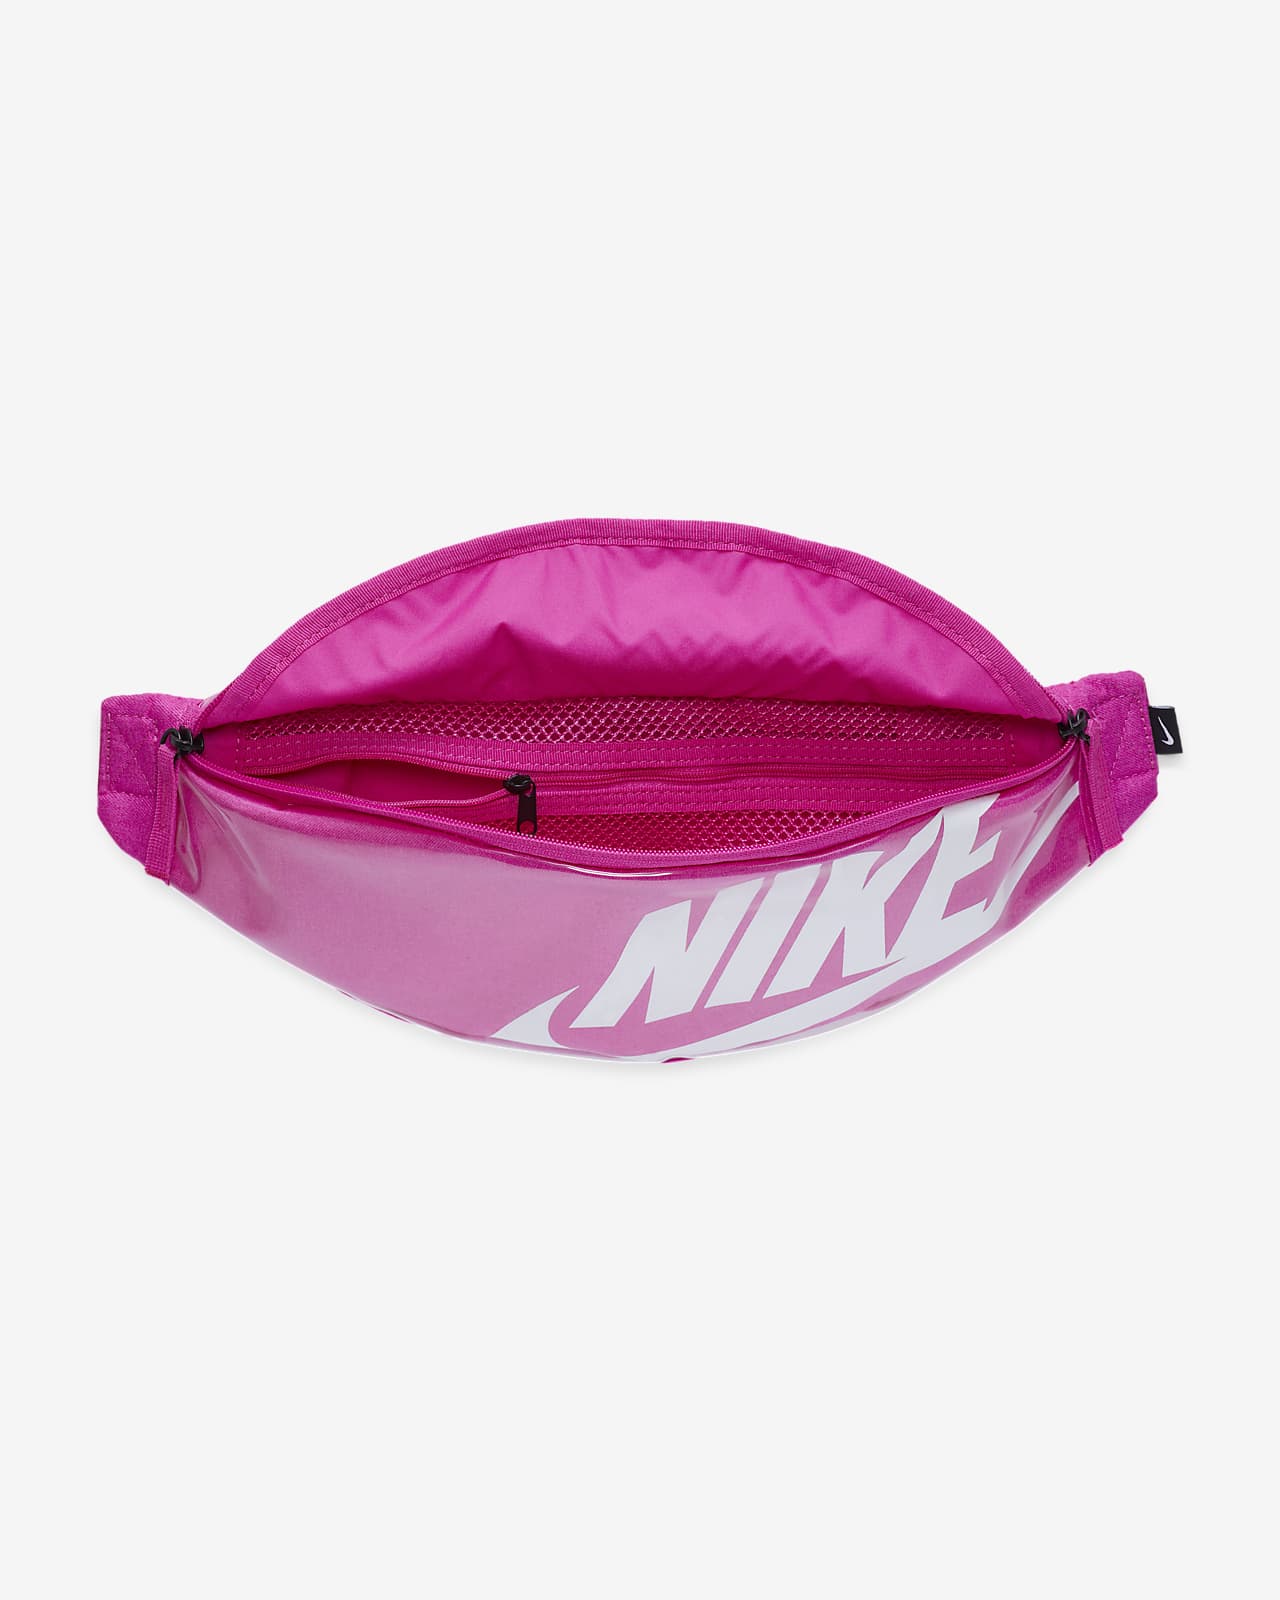 hot pink nike fanny pack